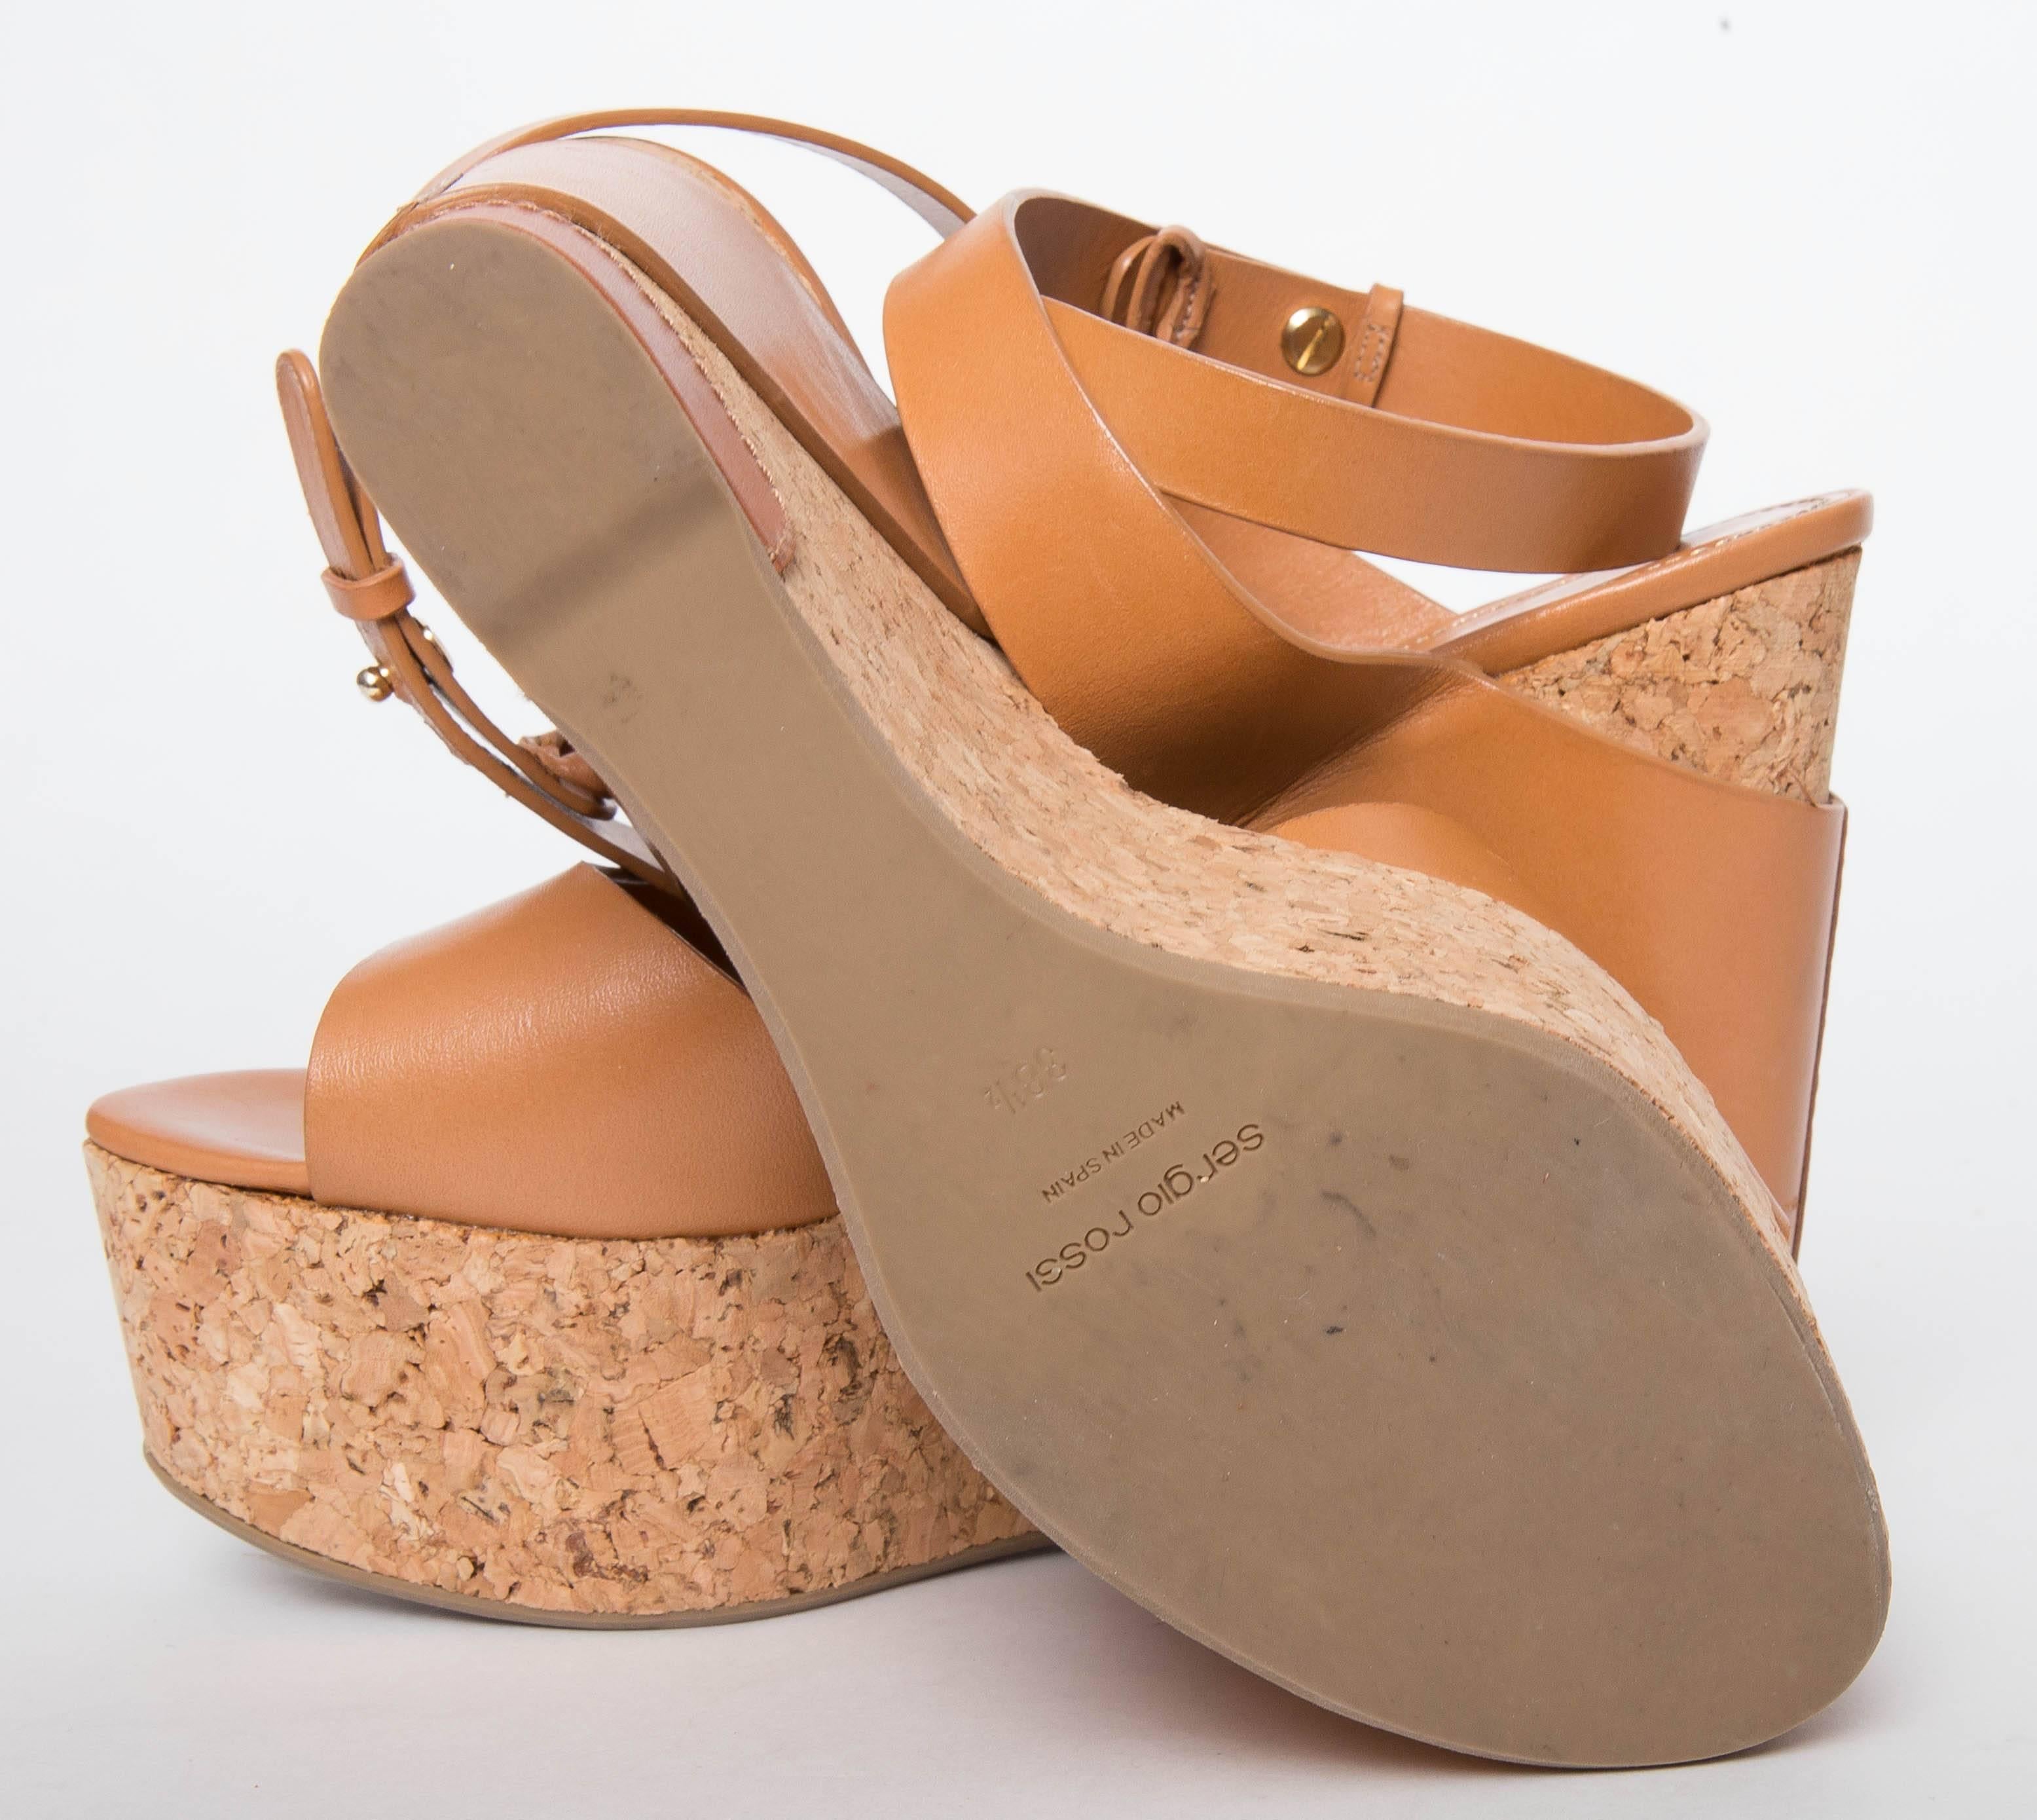 Sergio Rossi Camel Cork Wedge Sandals EU38.5 In Excellent Condition For Sale In Westhampton Beach, NY